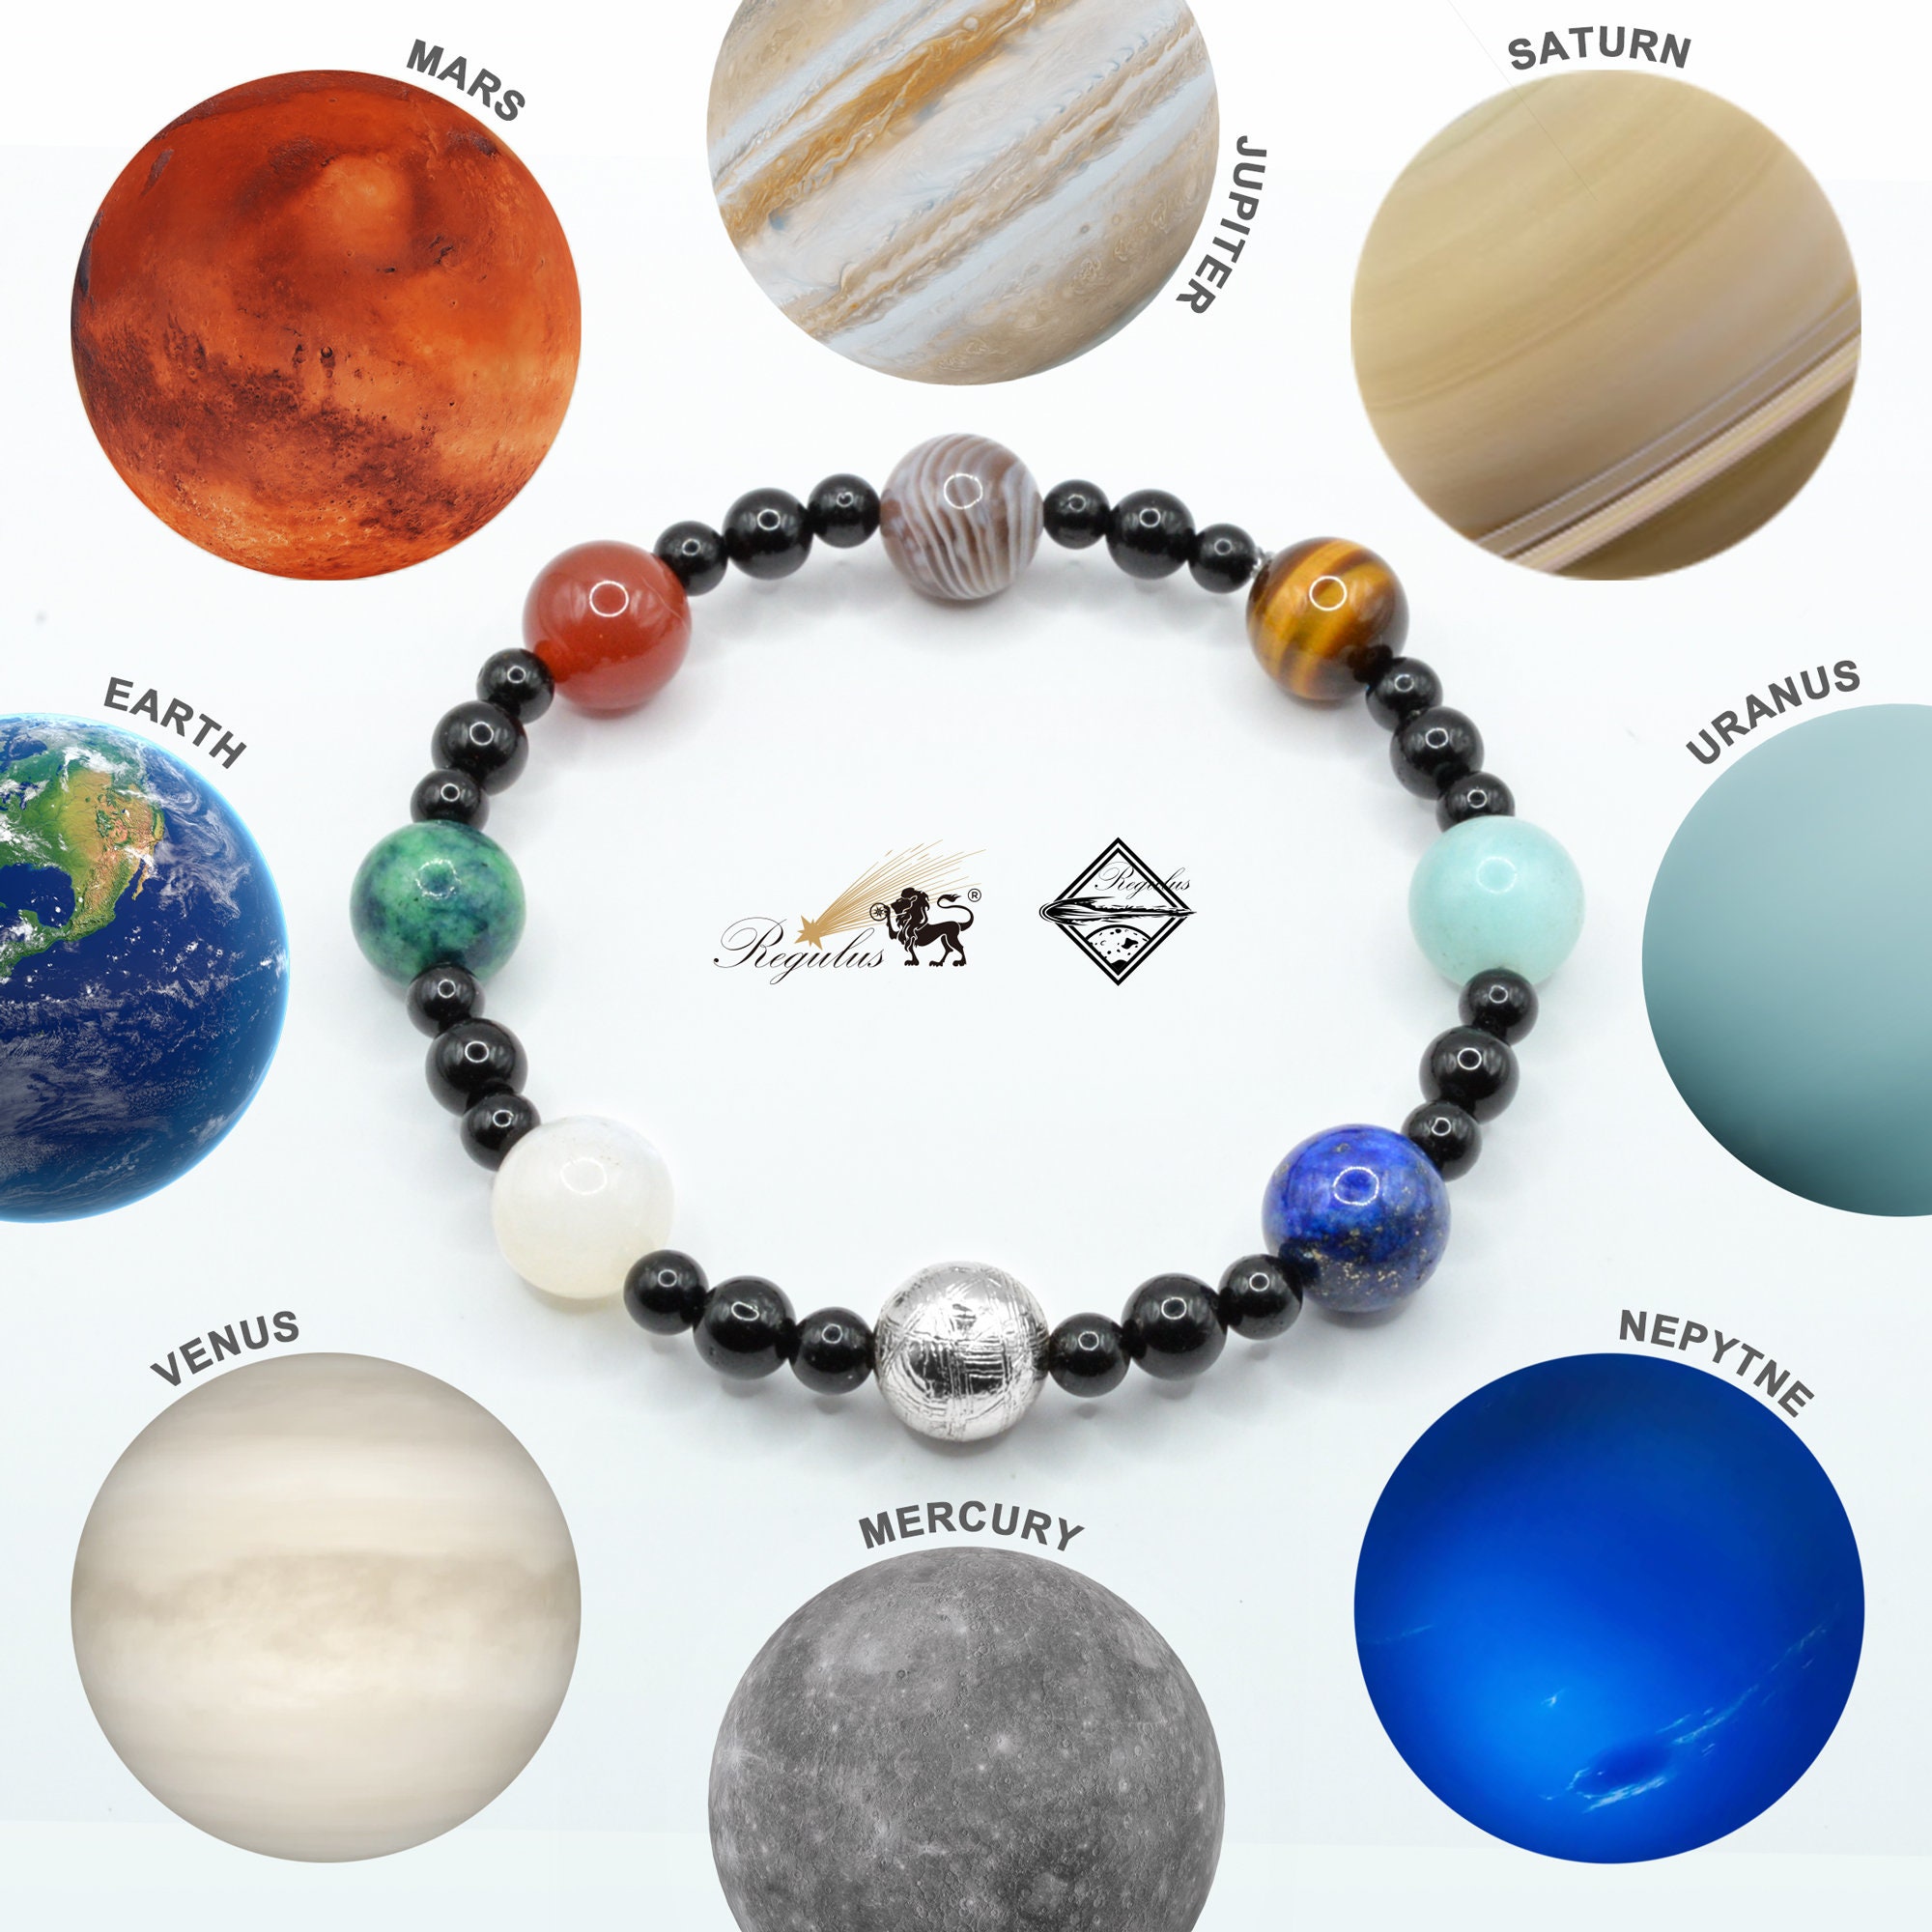 Navratna Gemstone Bracelet XI to harness the beneficial energy of our nine  planets - Engineered to Heal²